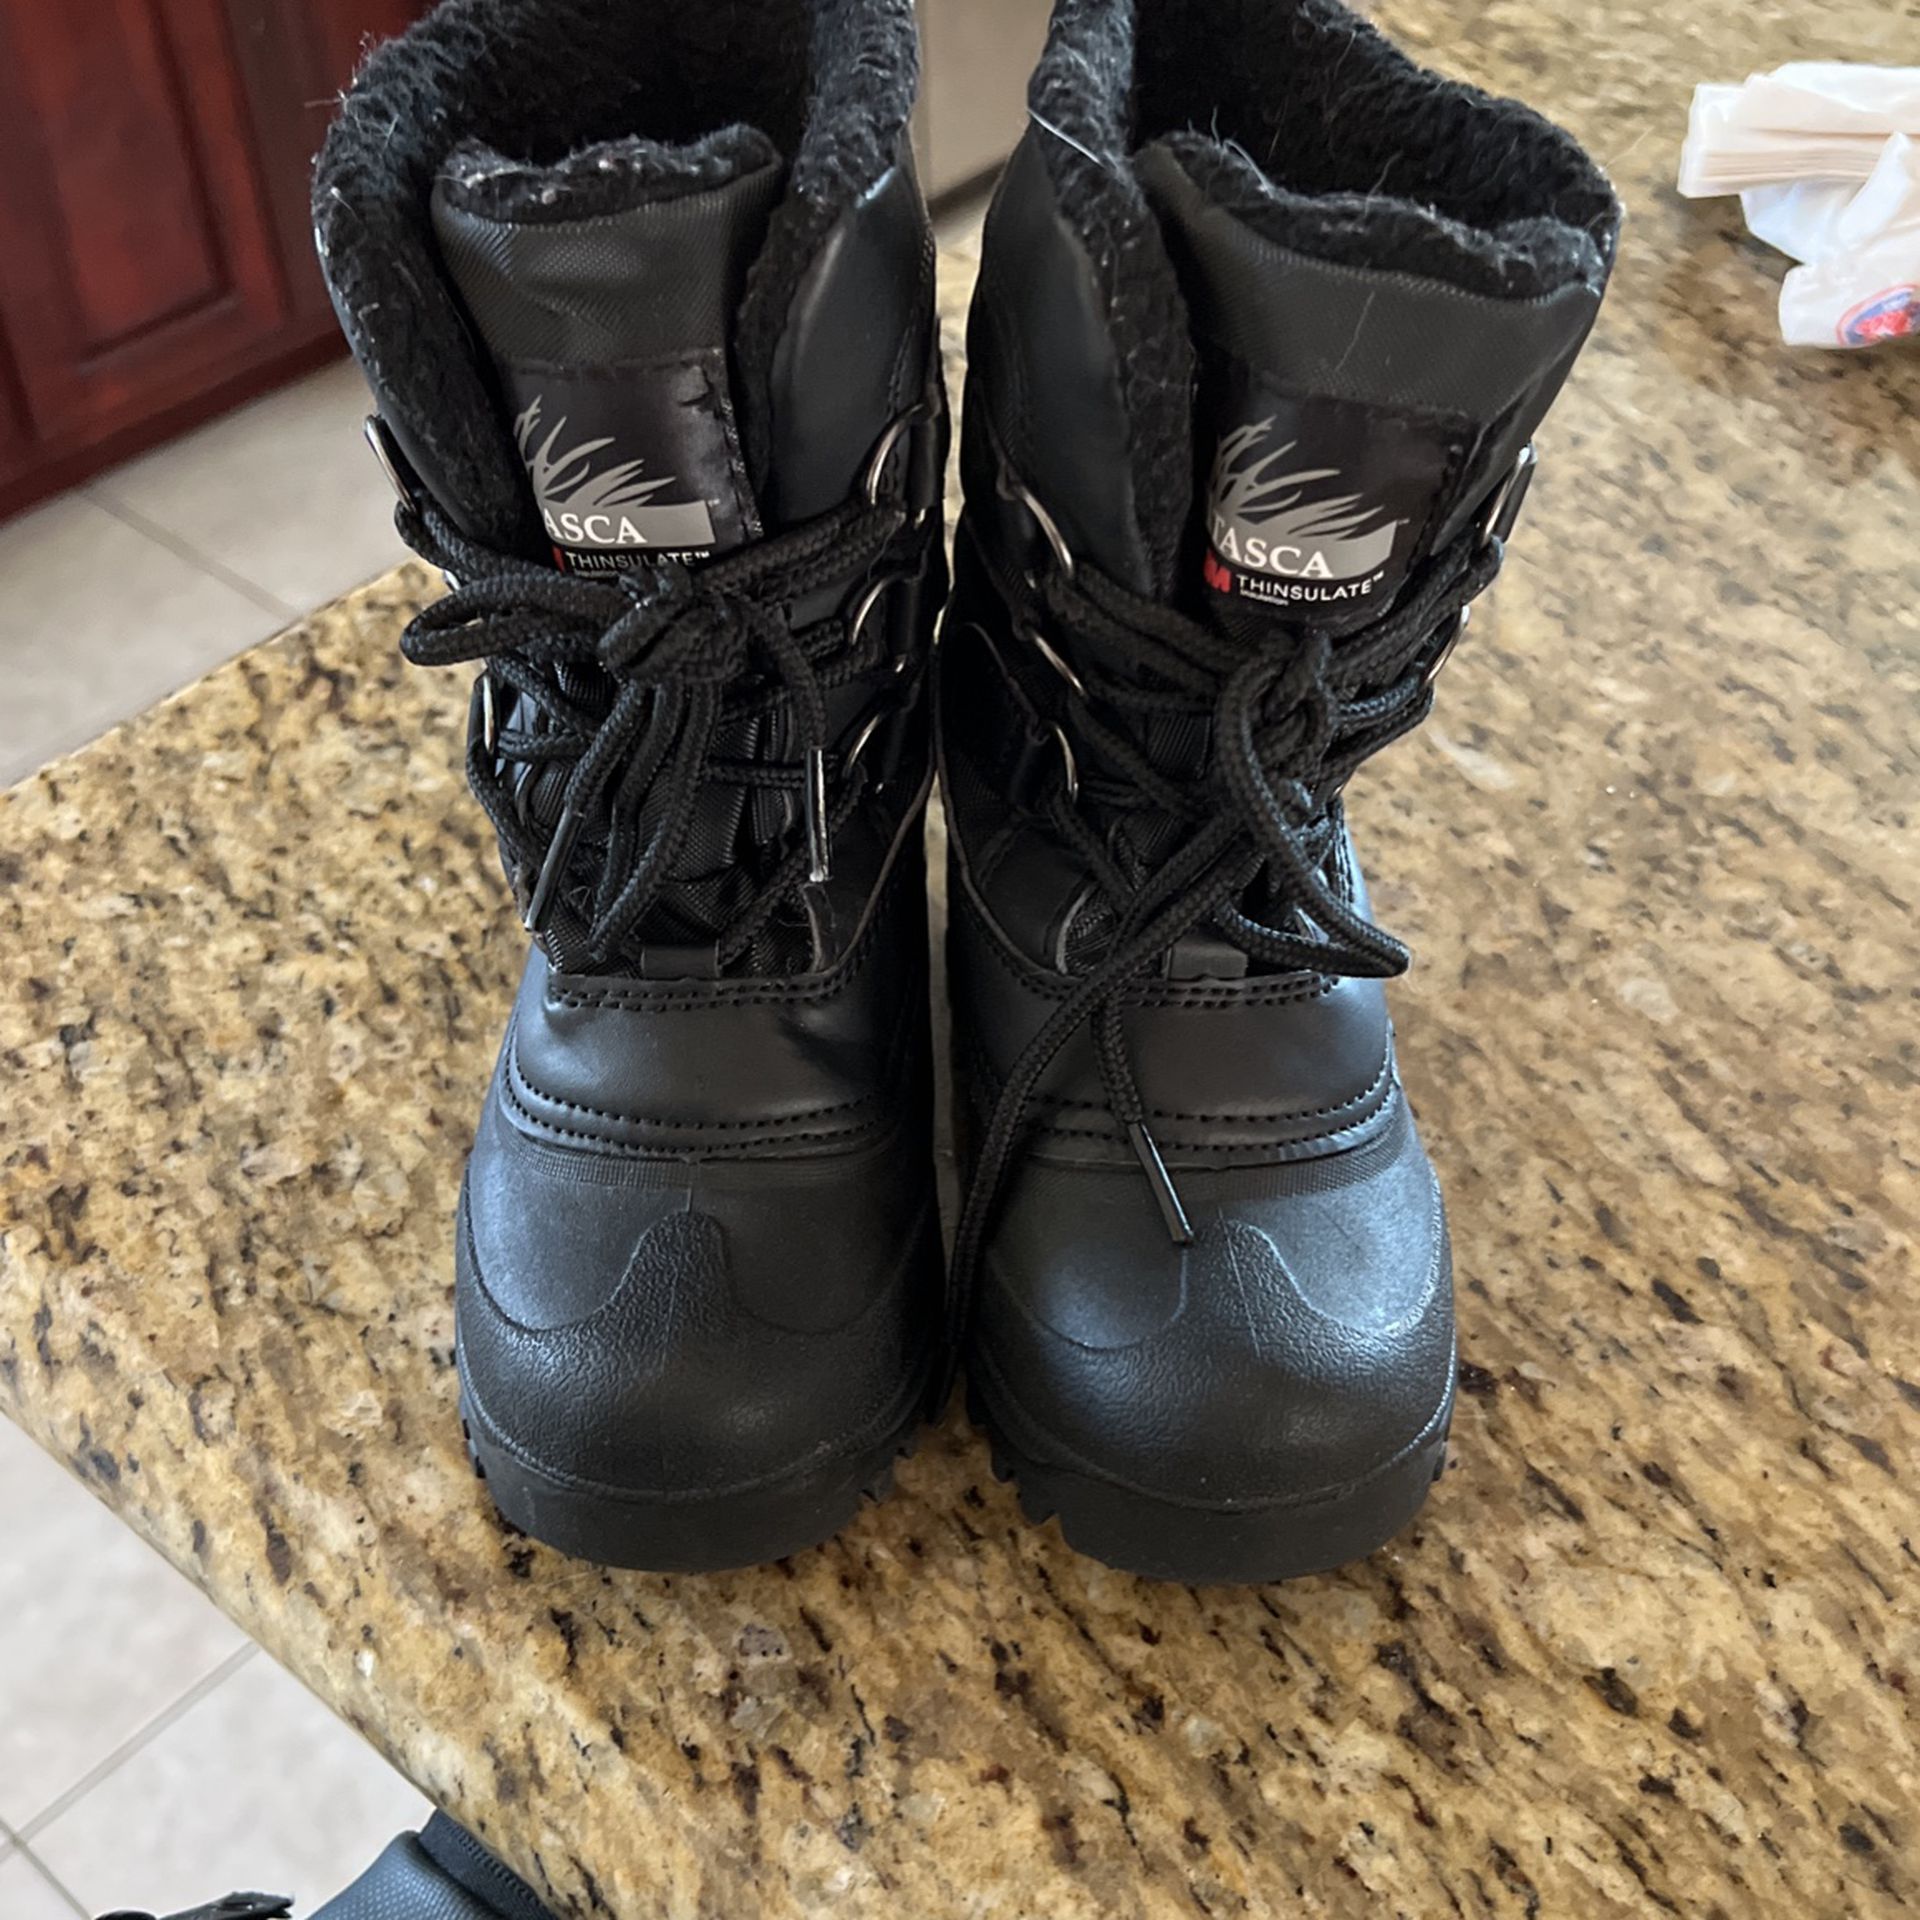 Itasca Kids Snow Boots - Good Condition 